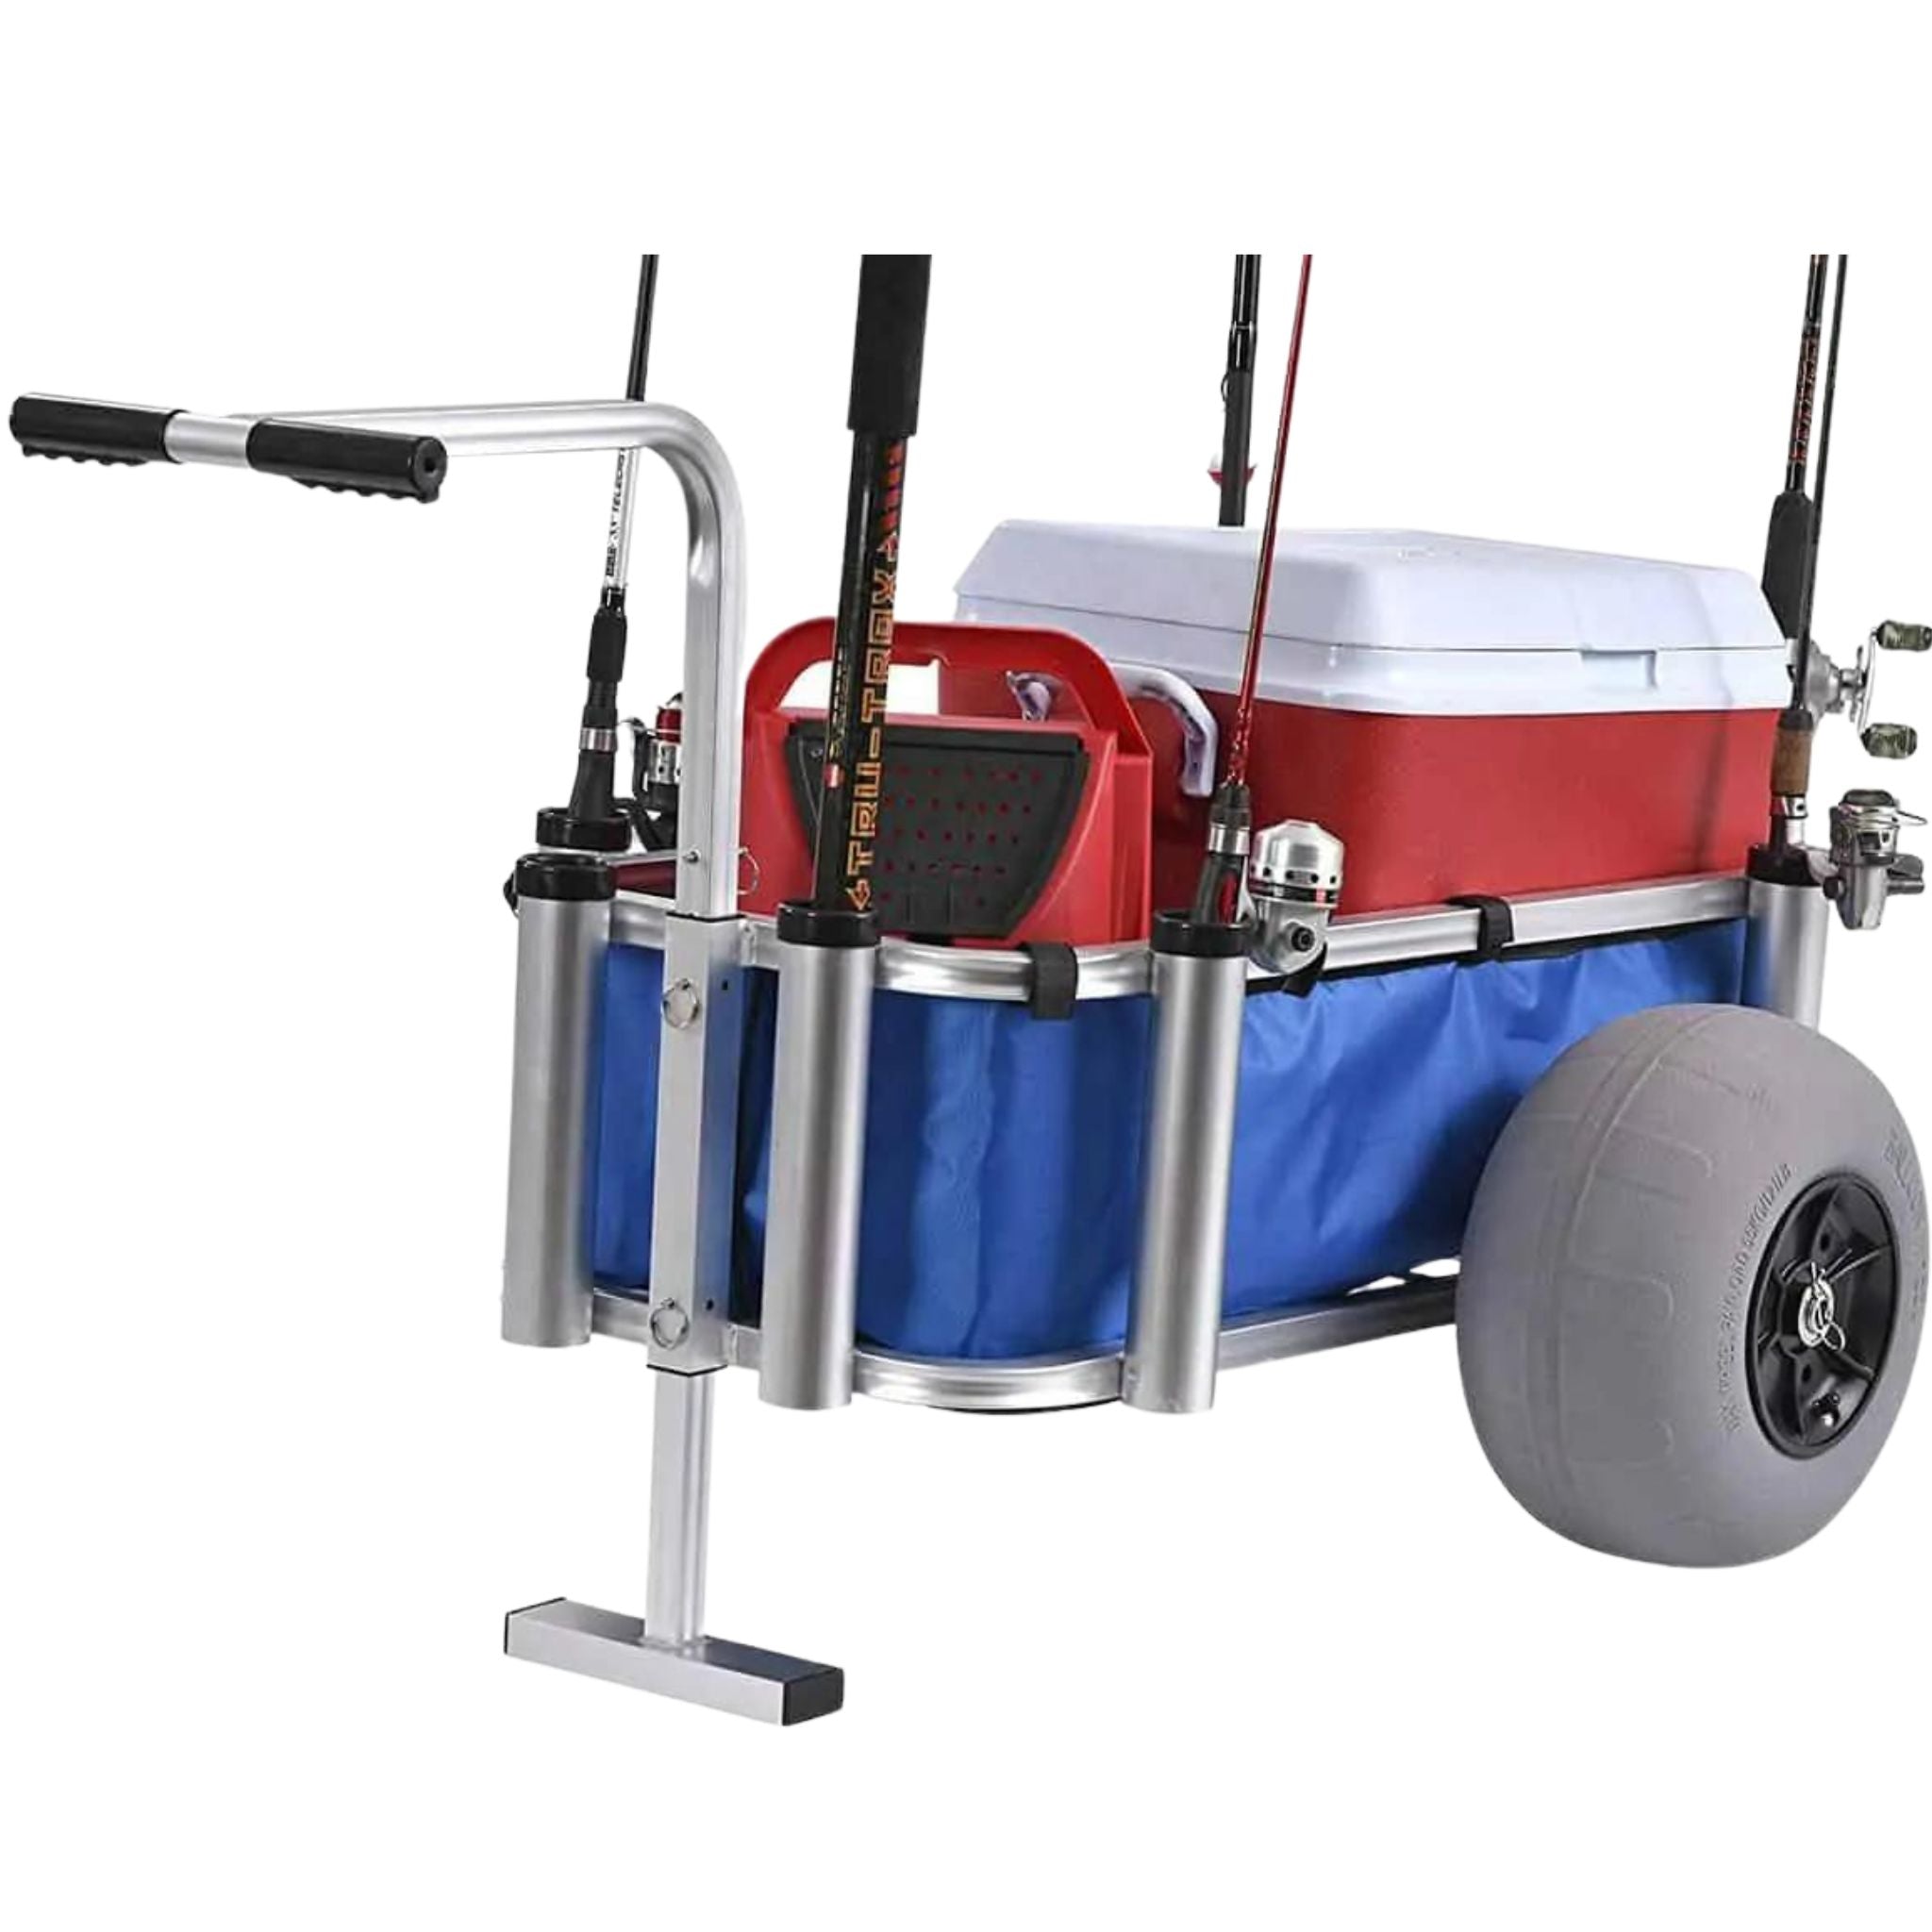 Fishing Cart With Balloon Wheels for Sand, Beach, Pier